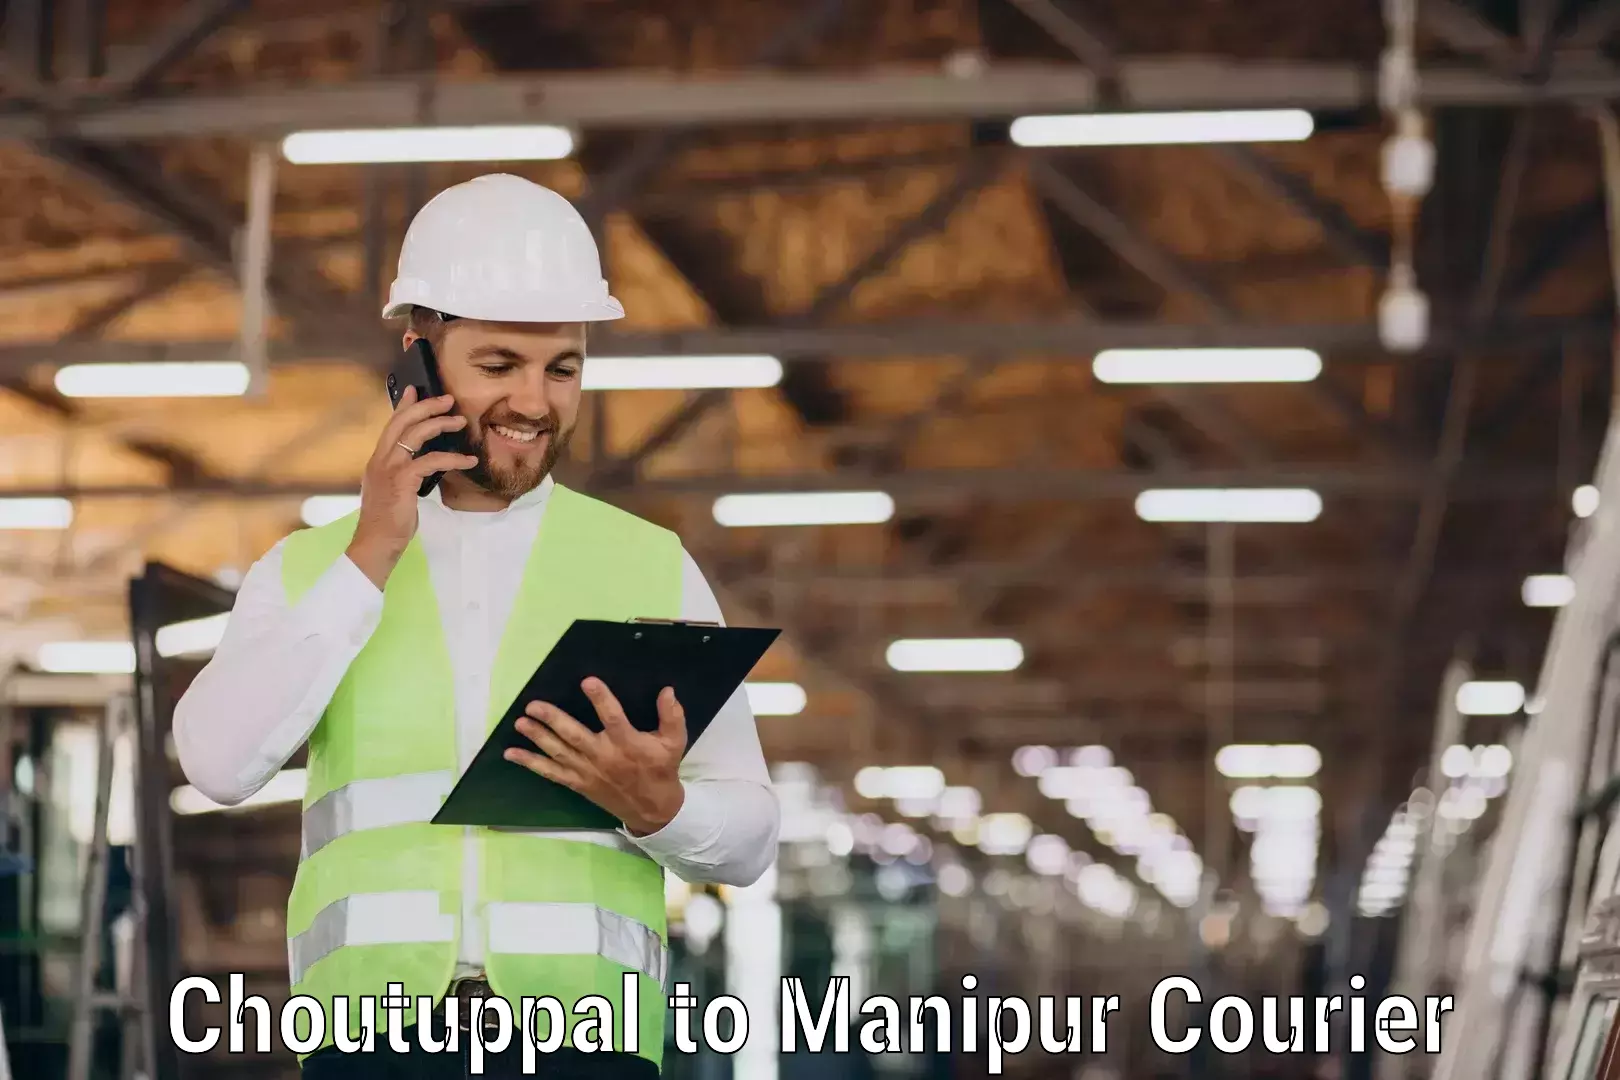 Efficient order fulfillment Choutuppal to Manipur